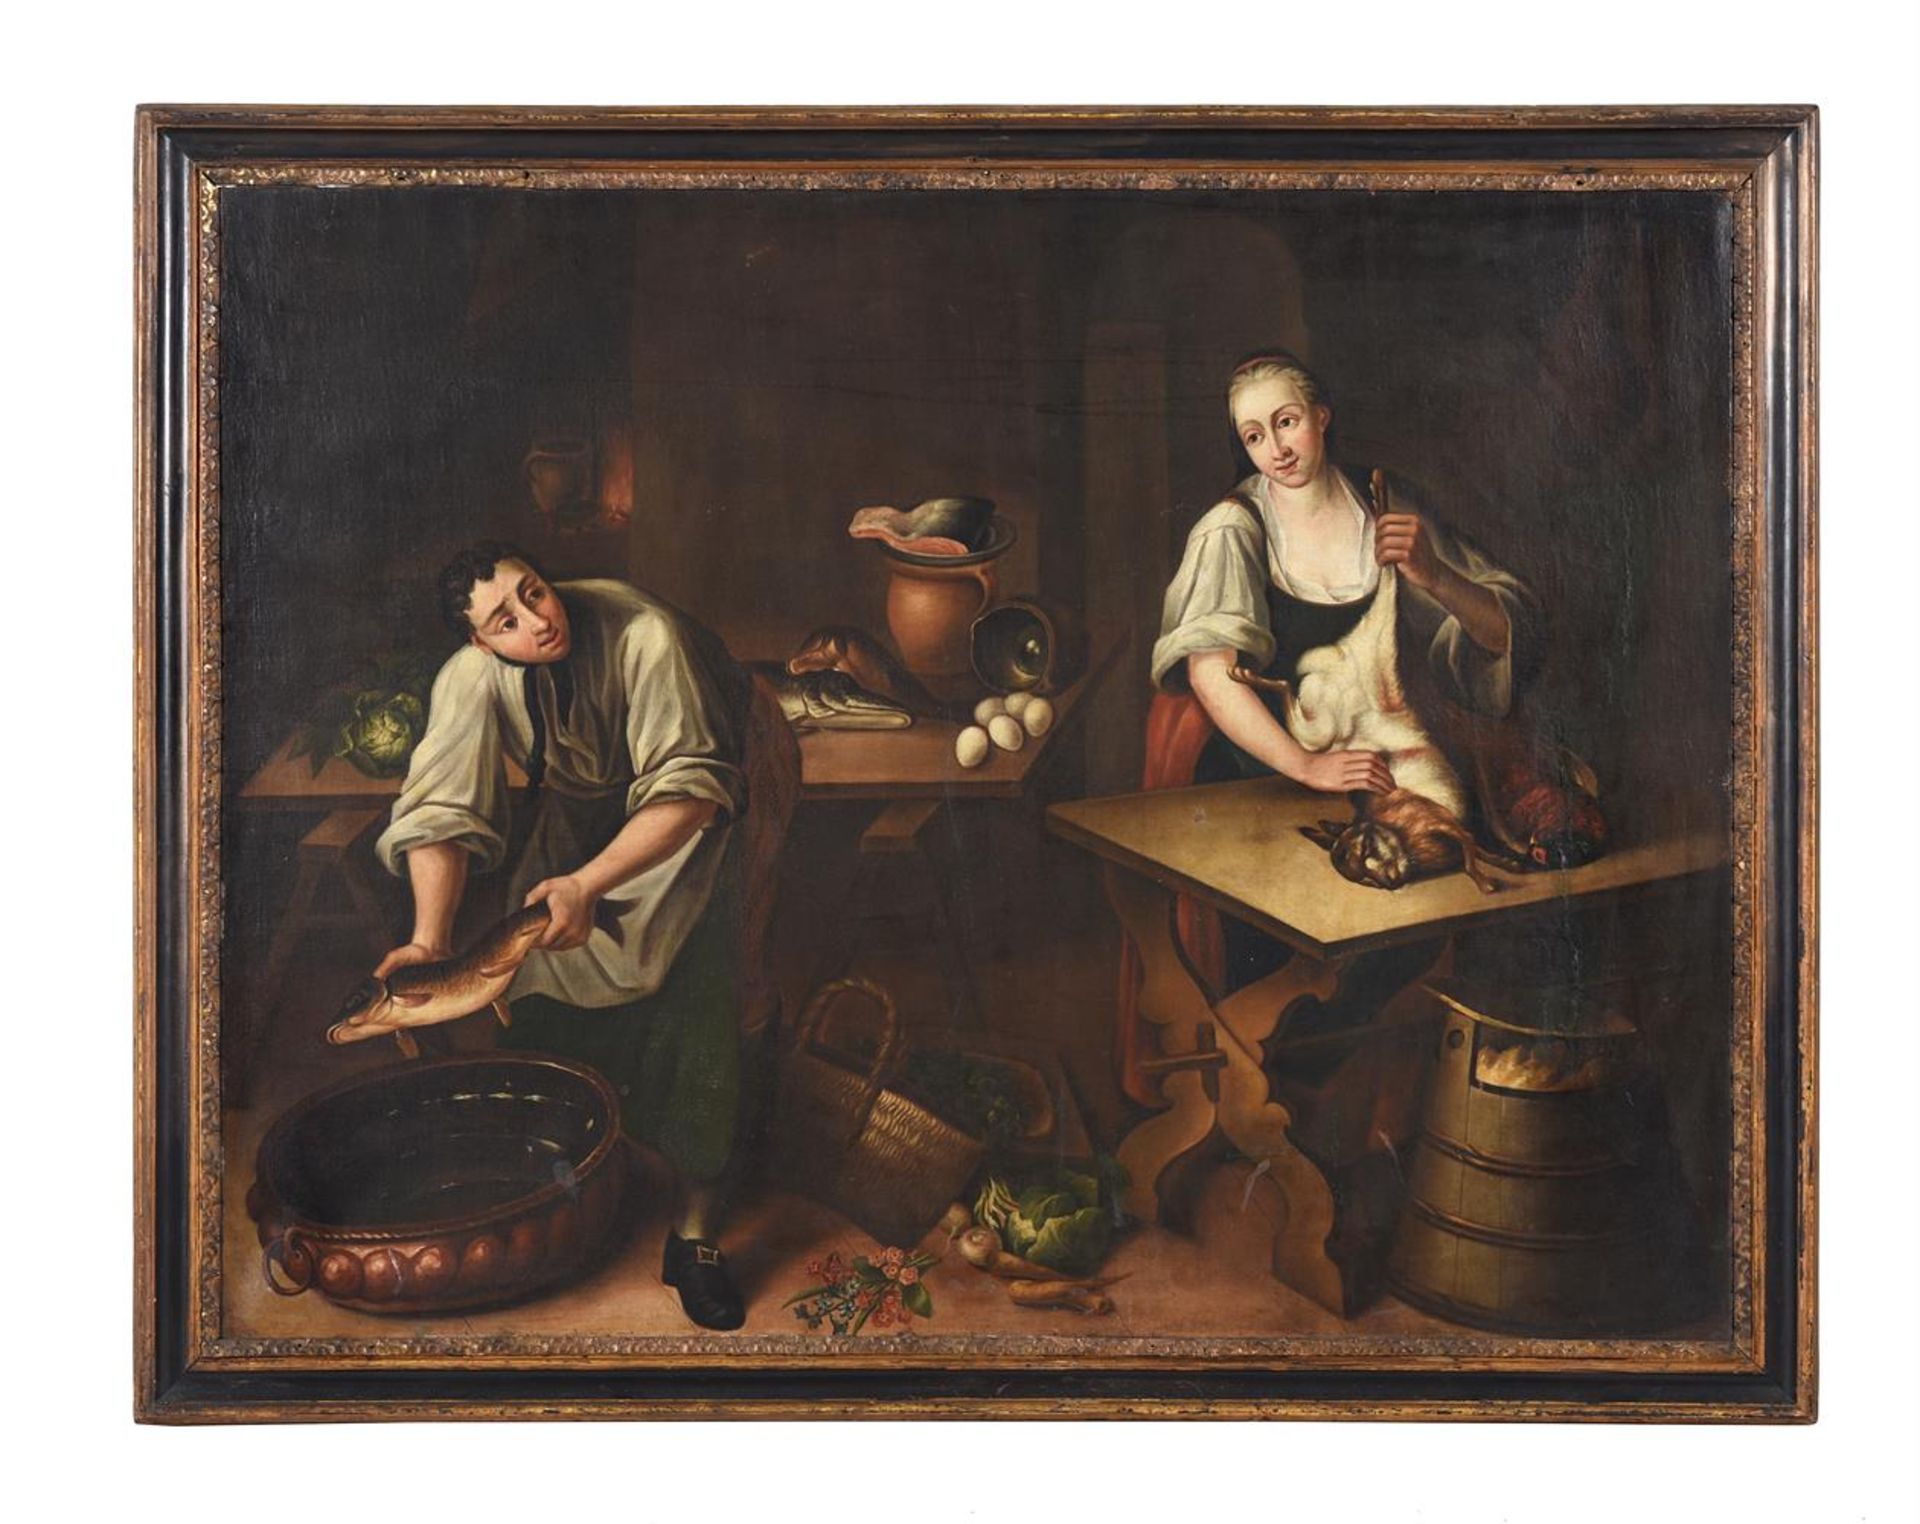 GERMAN PROVINCIAL SCHOOL (18TH CENTURY), A PAIR OF KITCHEN SCENES - Image 3 of 6